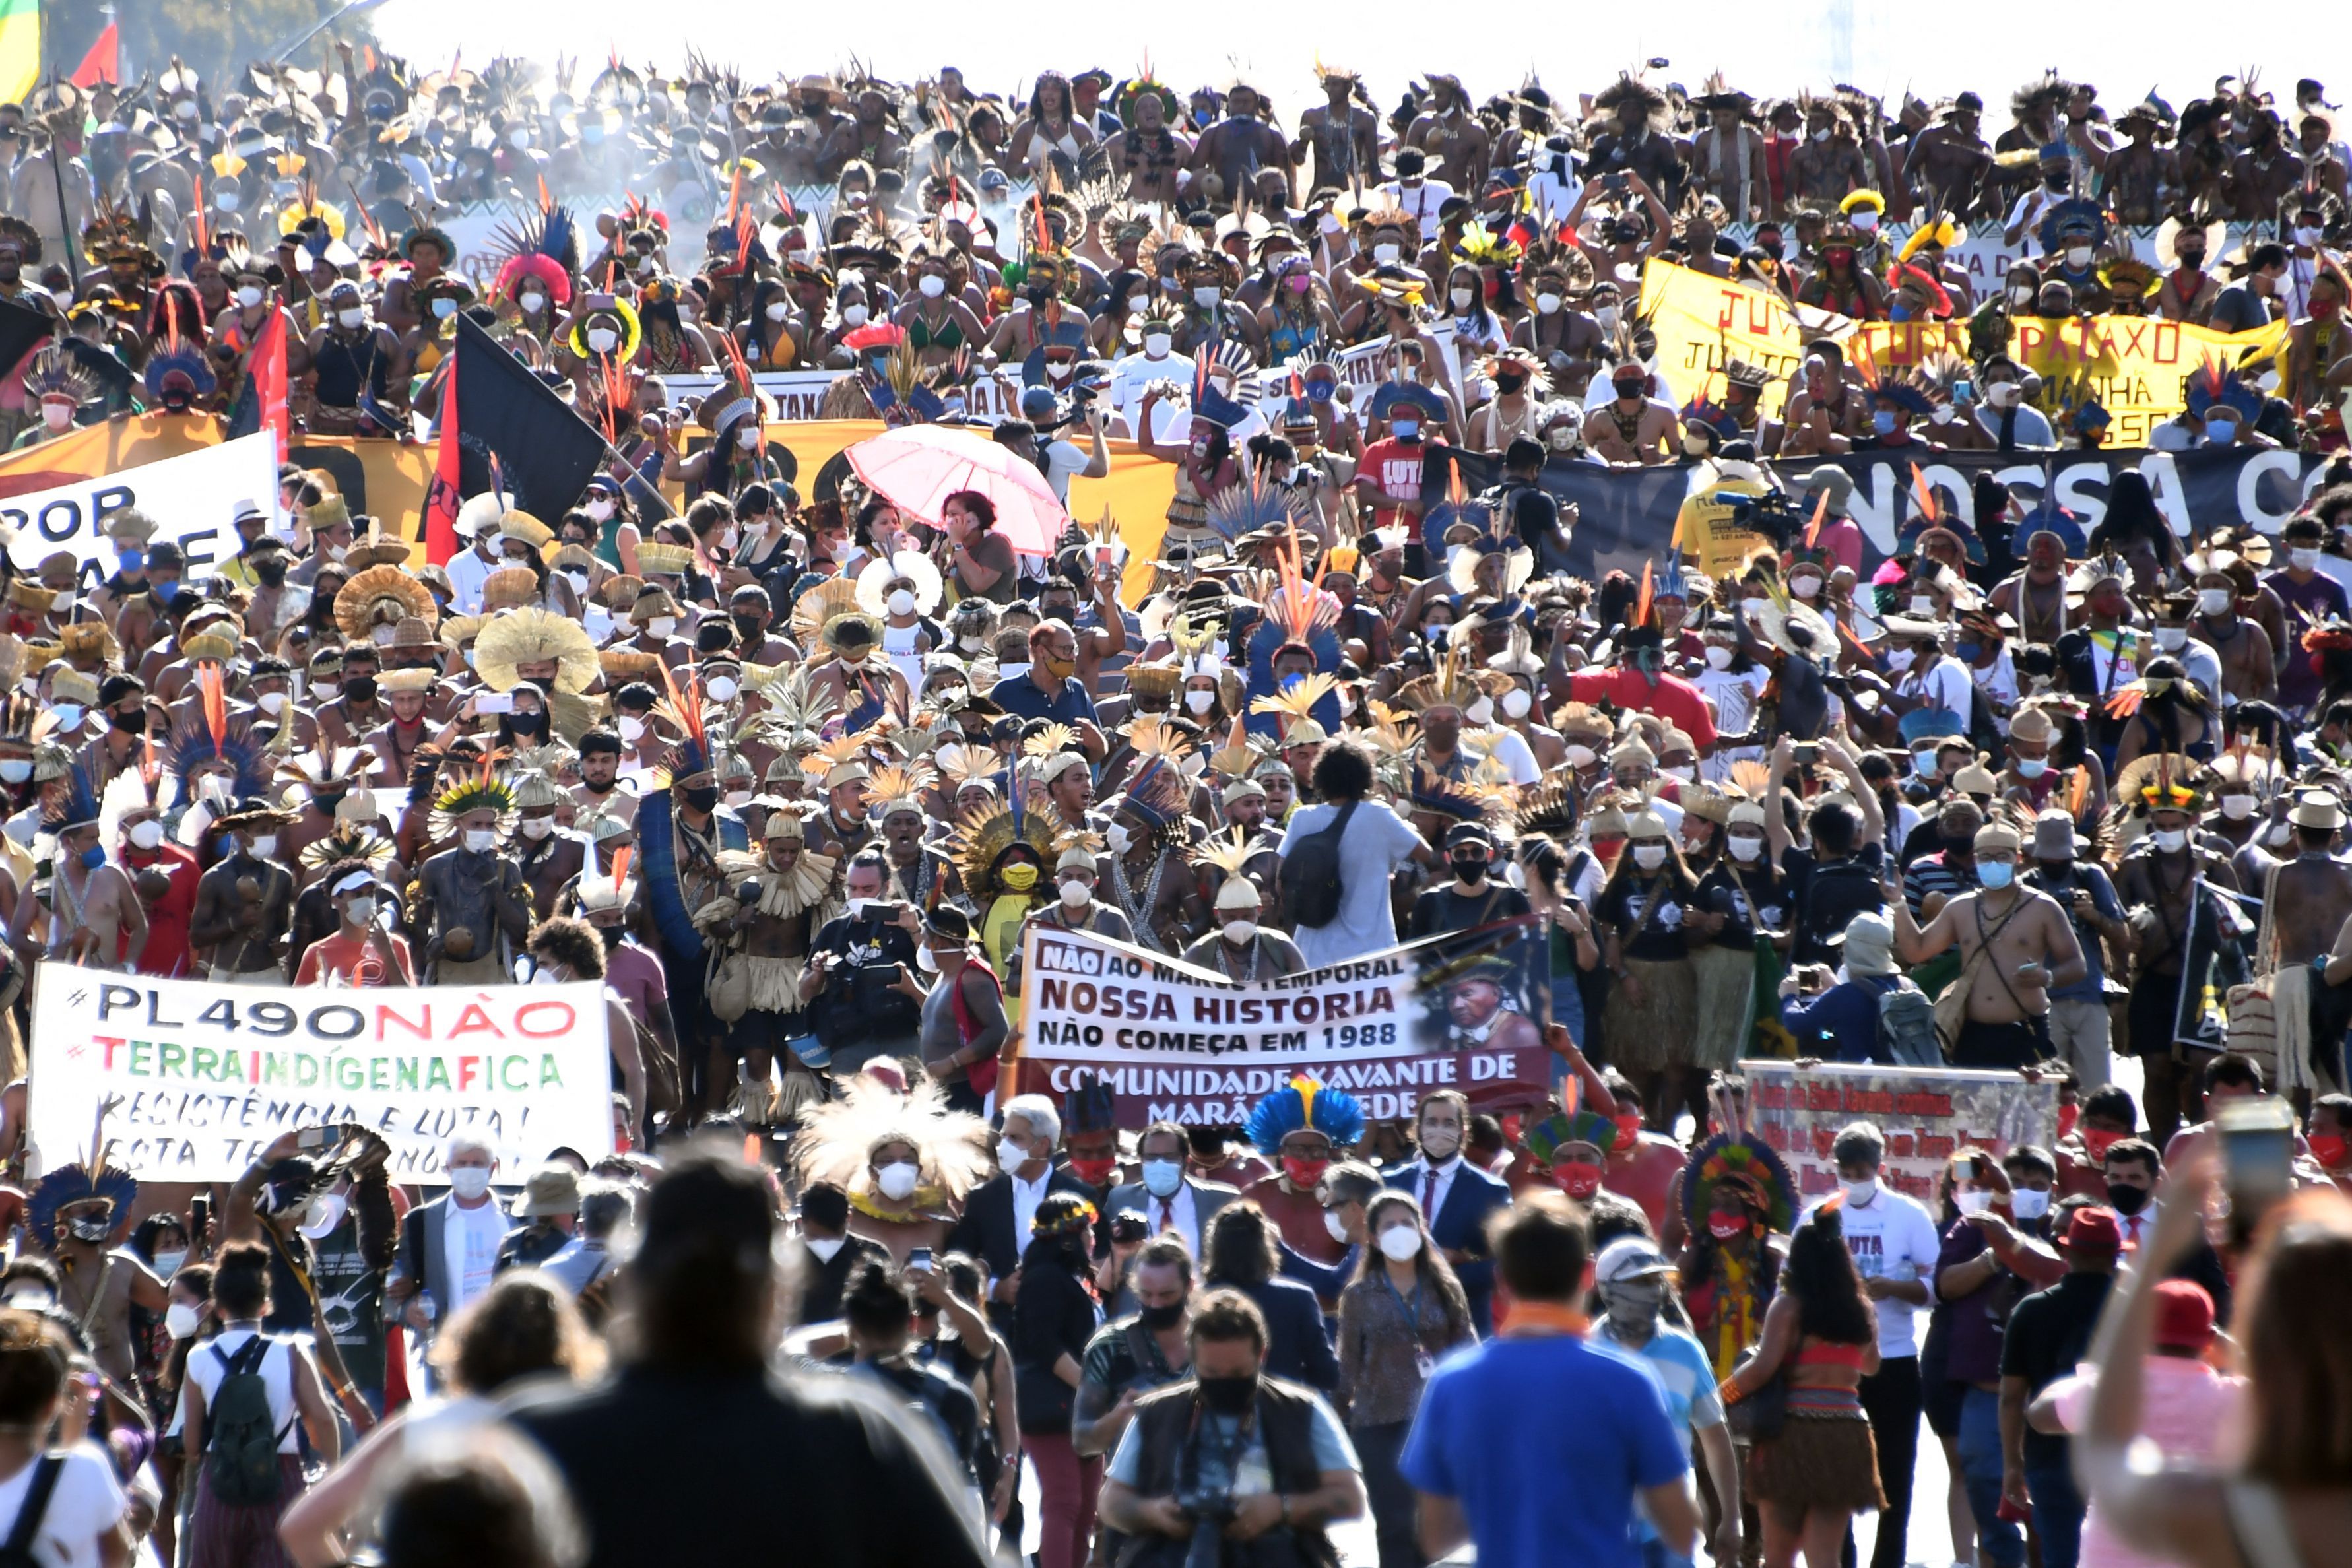 Photo of a massive crowd of Indigenous protesters, holding banners and signs